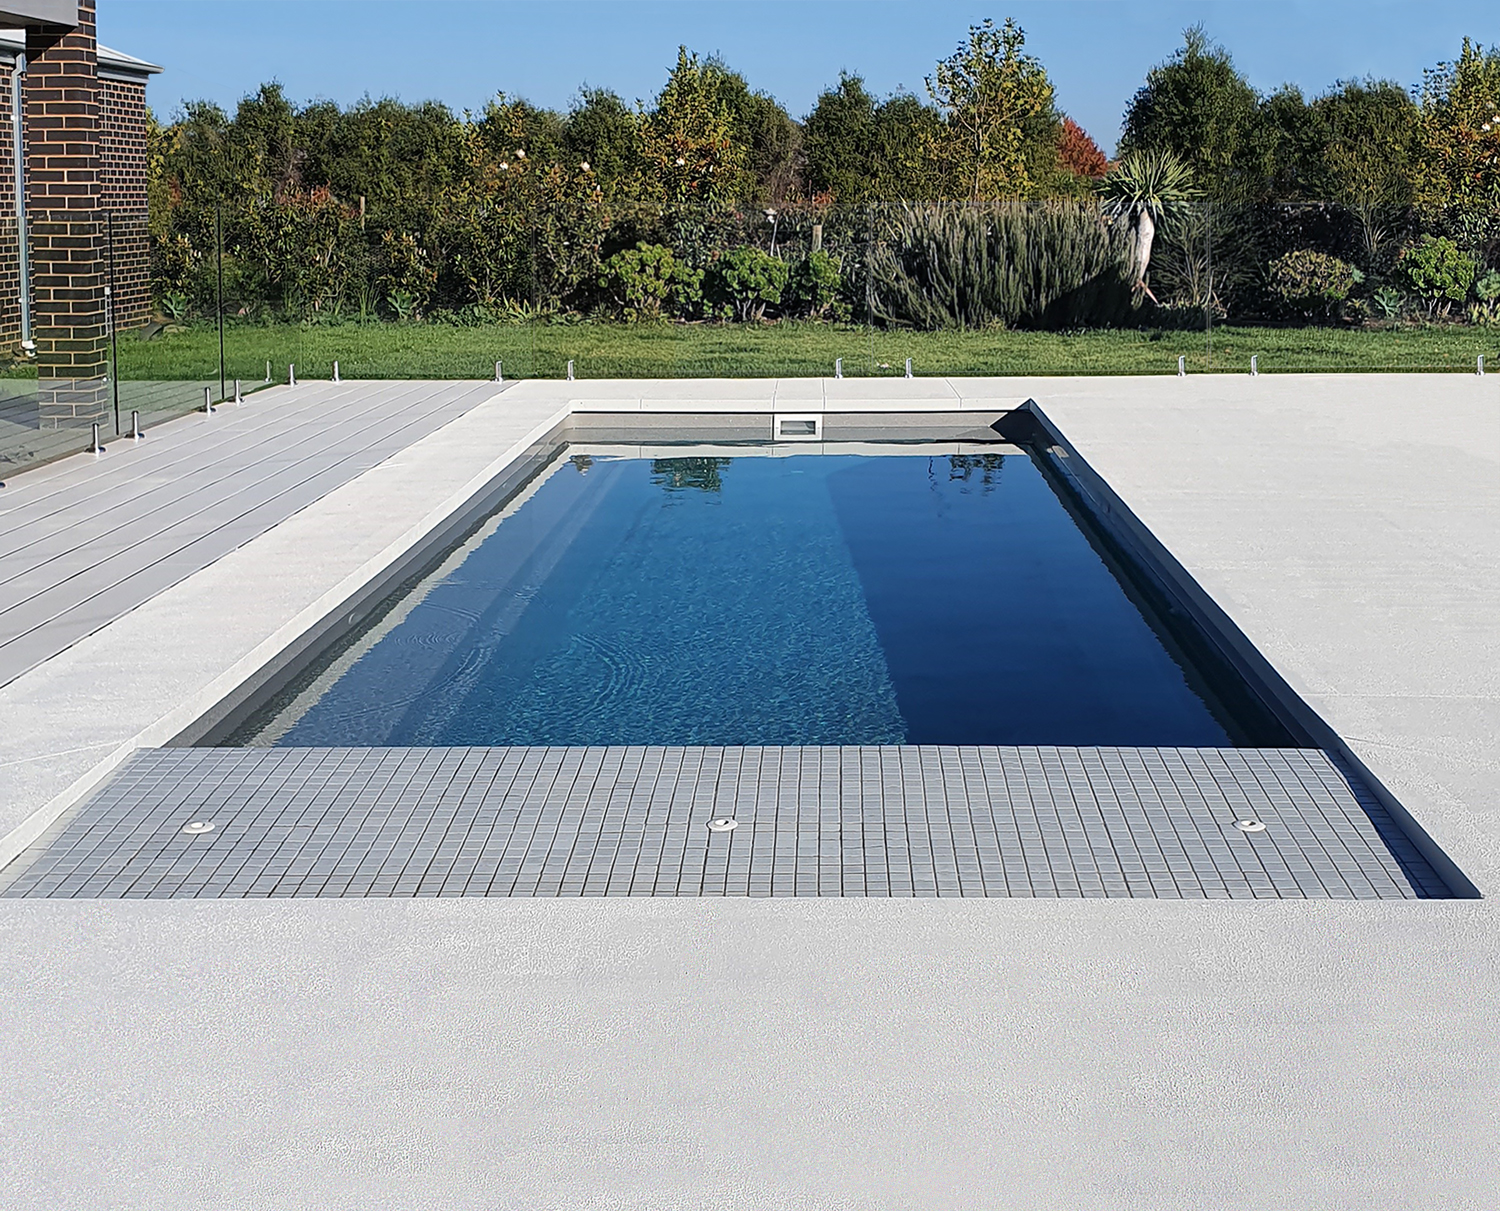 Pool Paving Paints Coatings, How To Seal Tiles Around A Pool